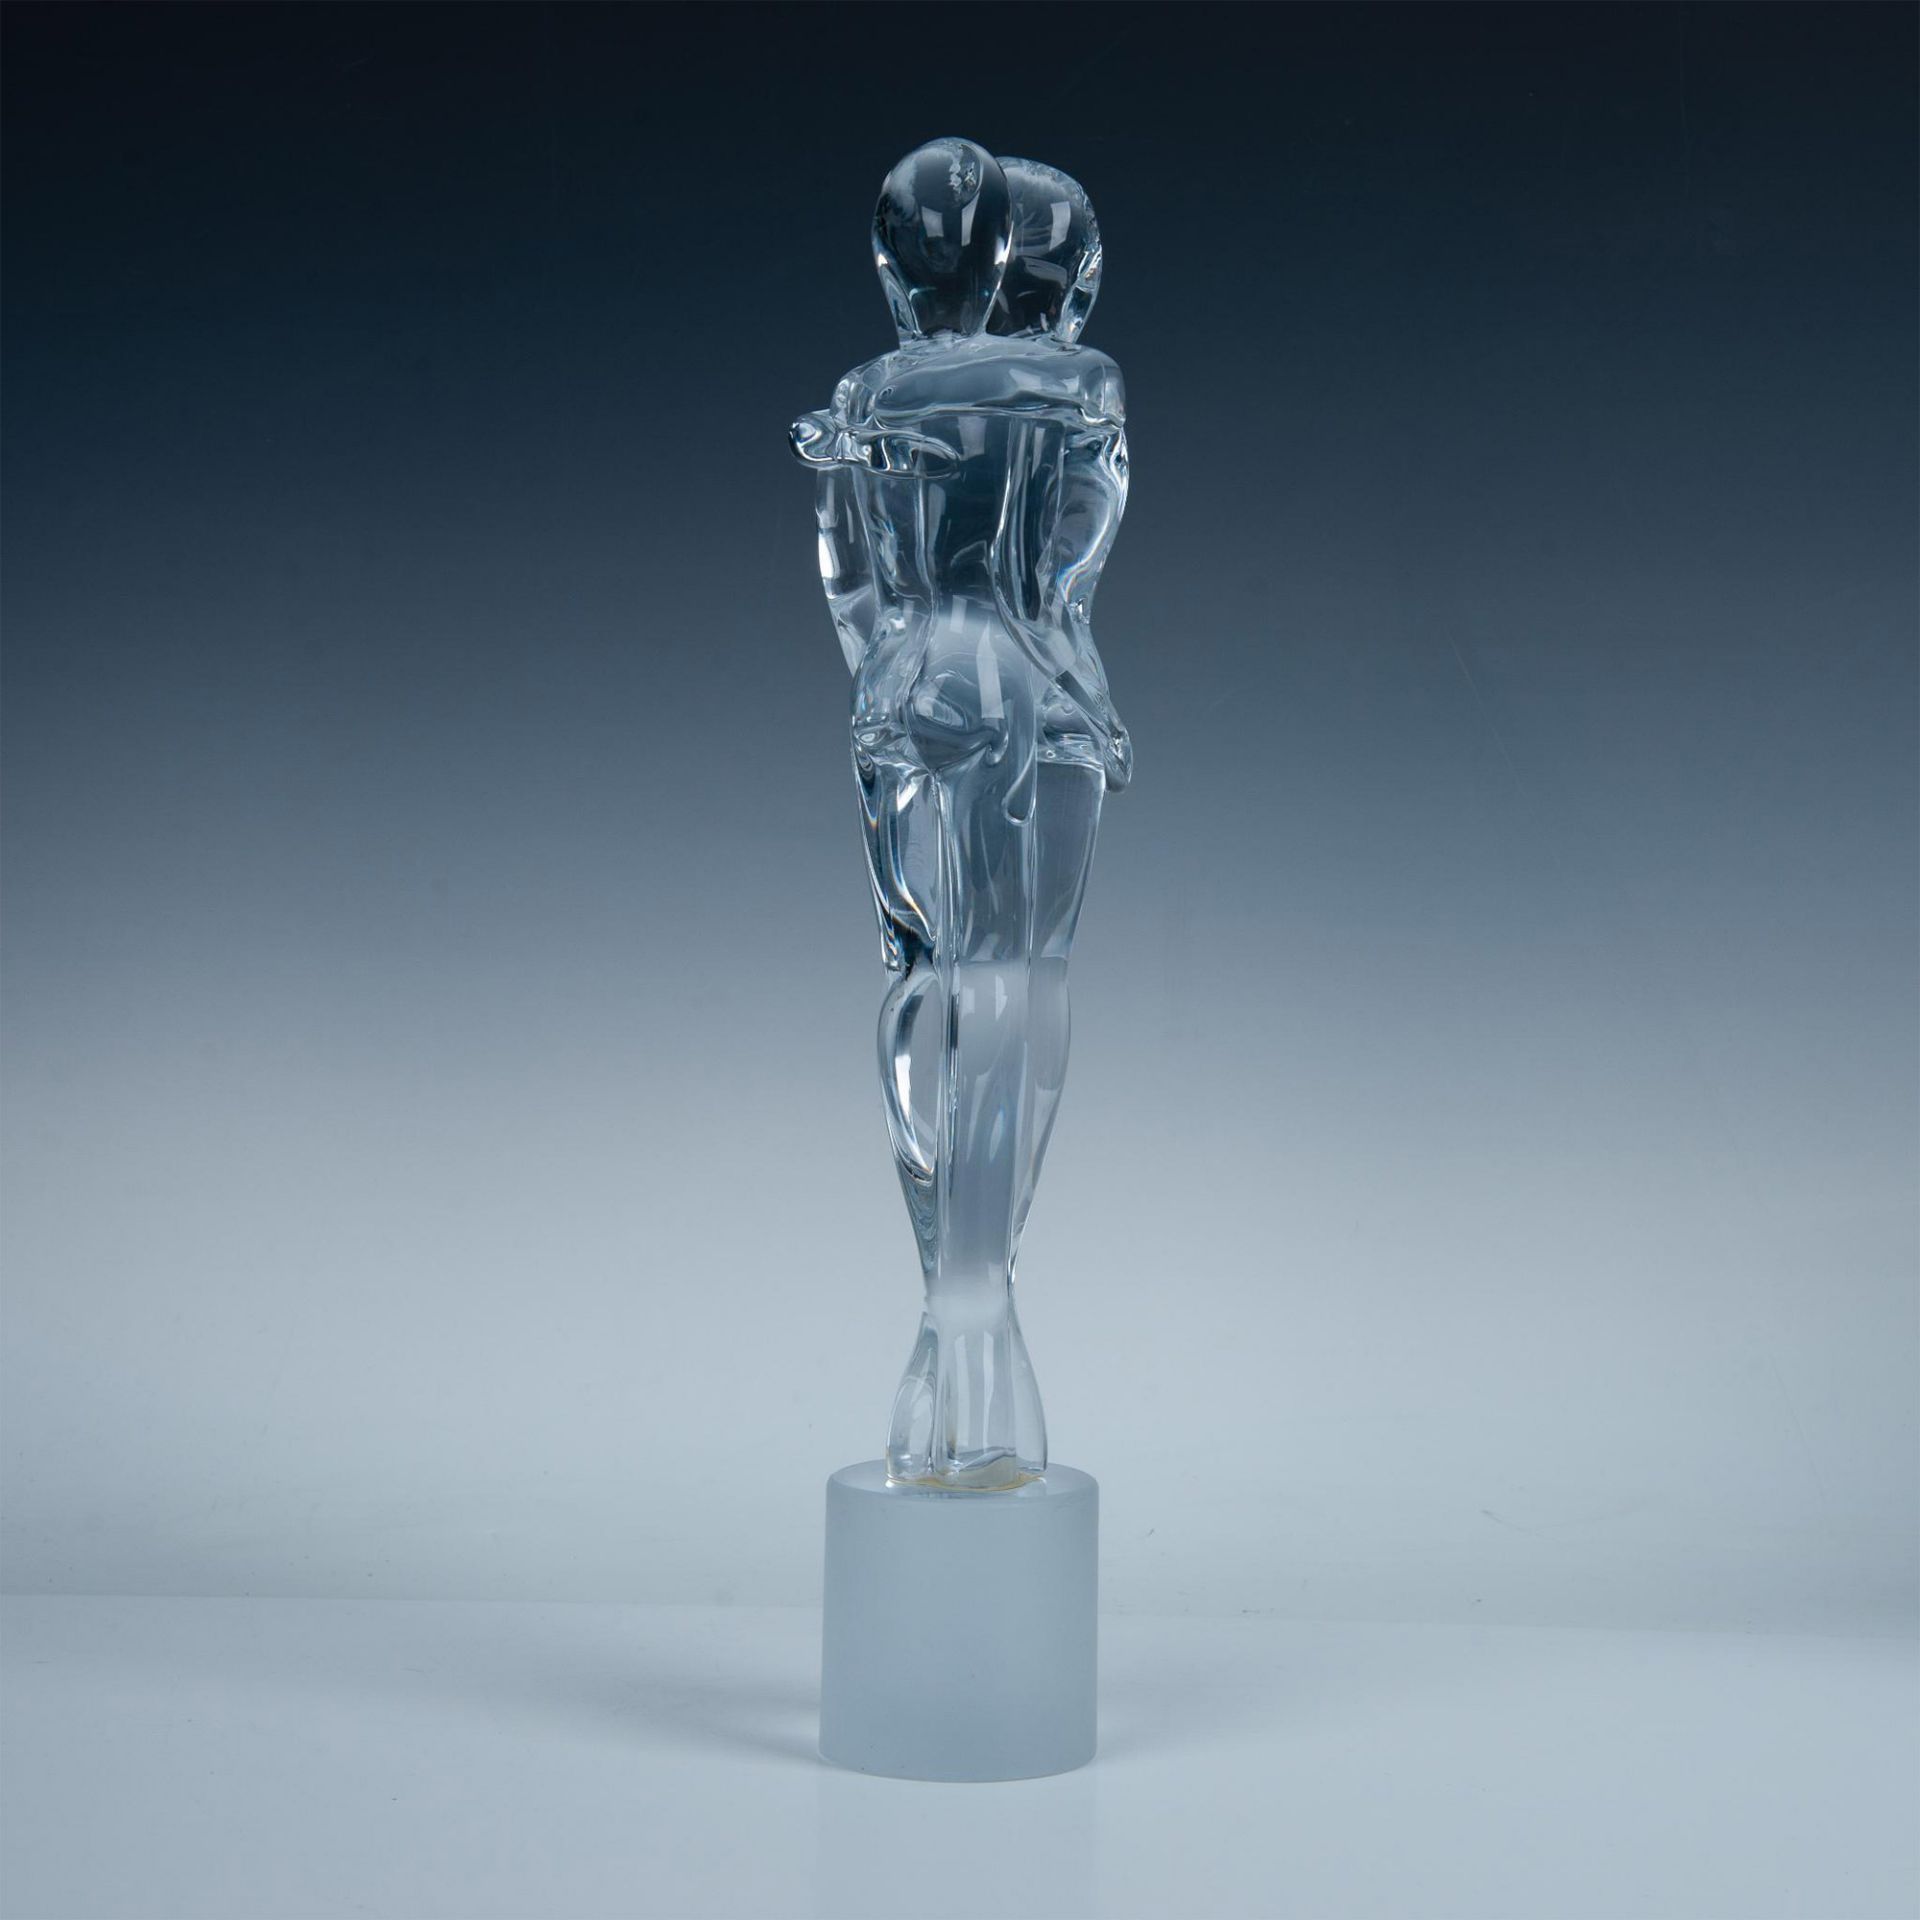 Murano Glass Sculpture by Renato Anatra, Two Lovers - Image 2 of 5